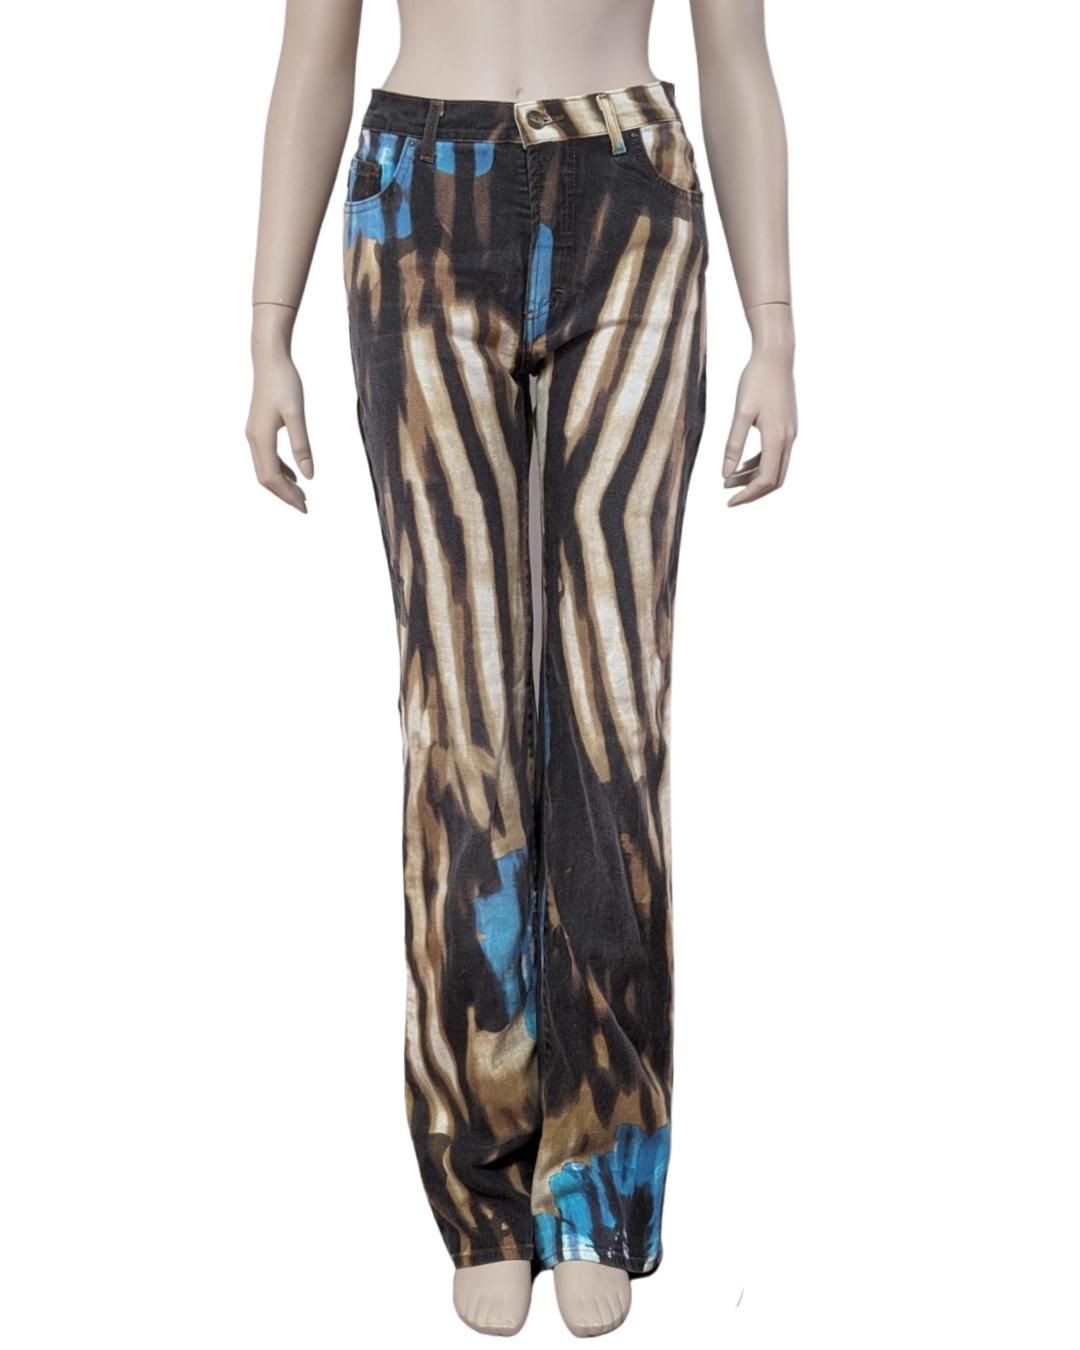 Iconic Roberto Cavalli - Just Cavalli line Abstract brown stripes and turquoise flowers for this super cool pants seen on Bella Hadid.

Very Rare

. Mid rise waist
· Slightly flared jeans
· All-over print

Fits large for XS, S 
Perfect for M 

Flat